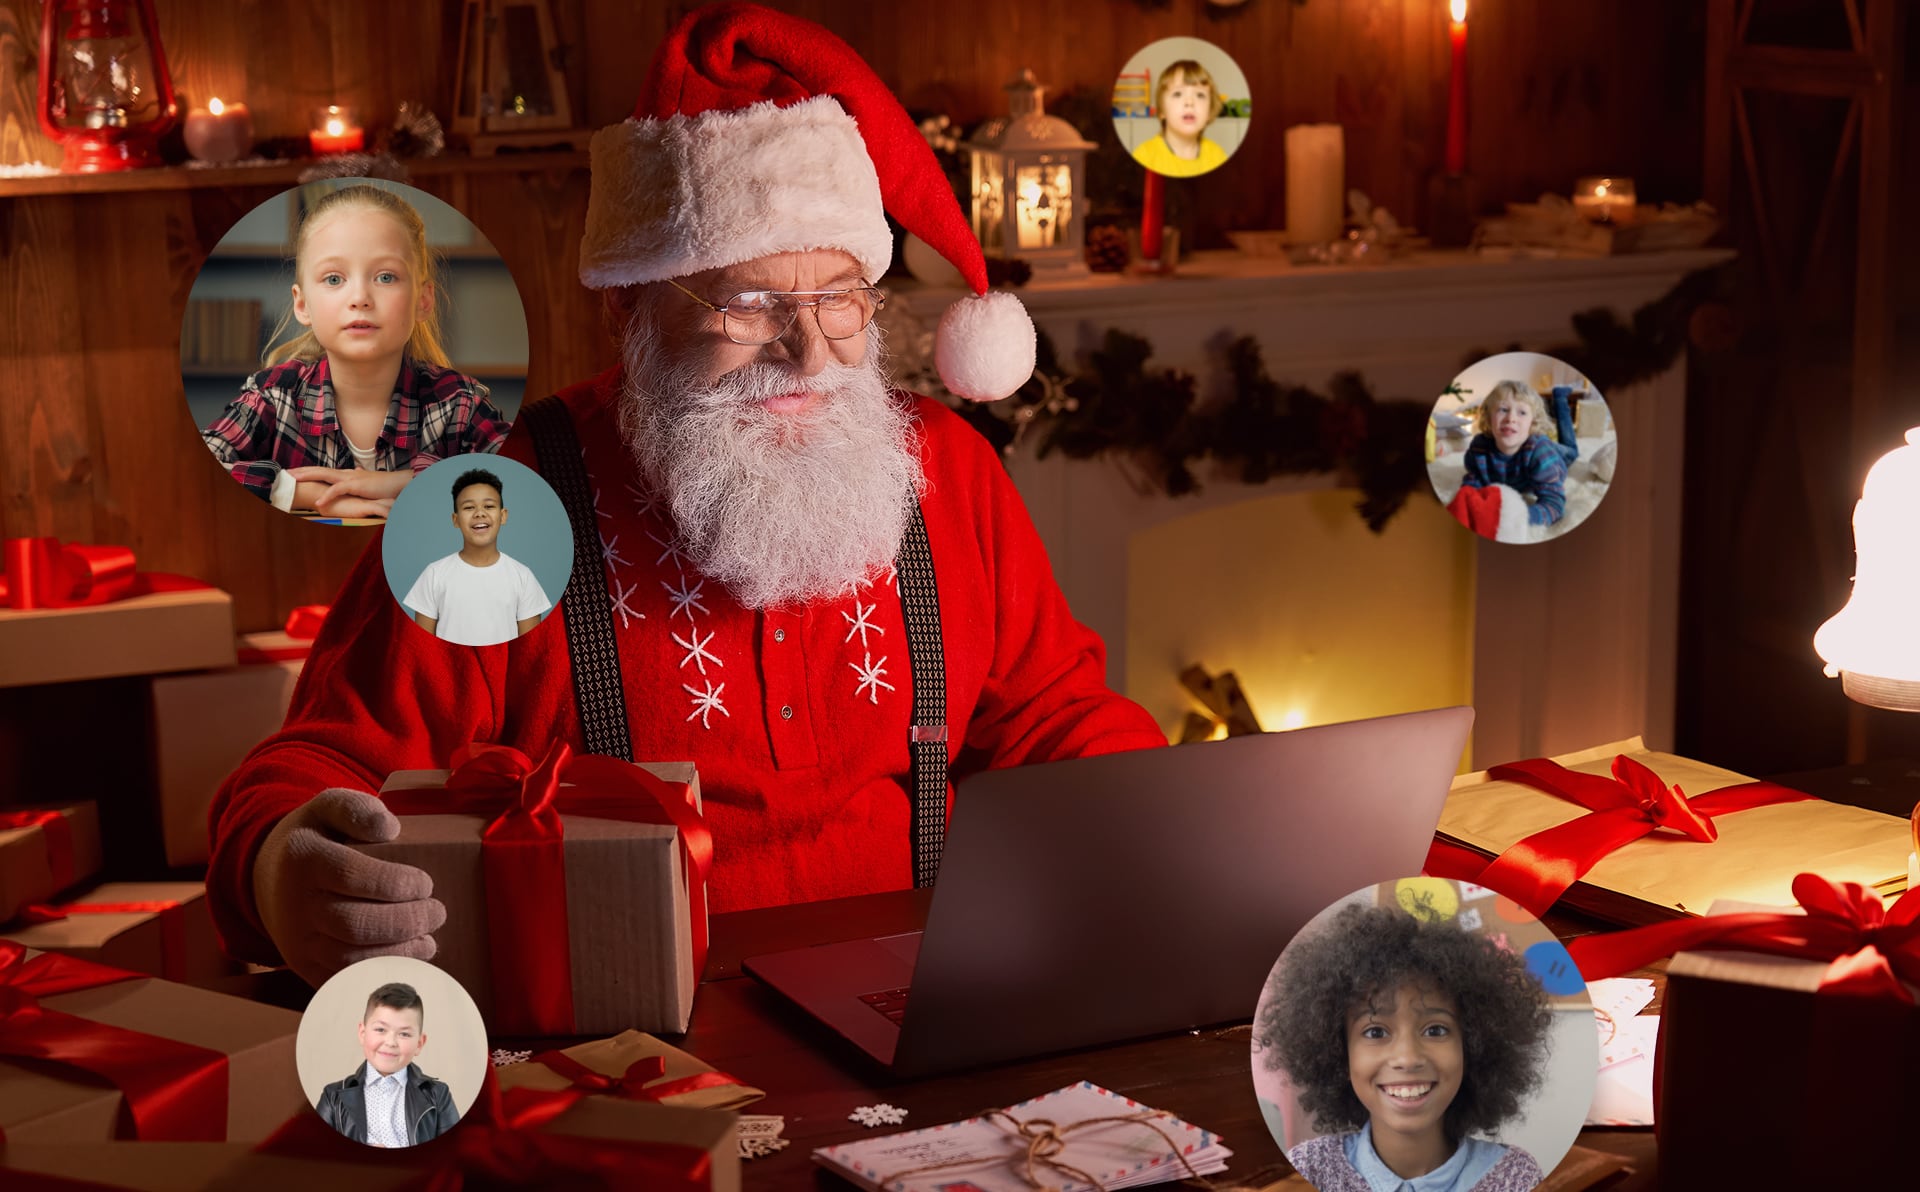 send-your-kids-holiday-wish-list-directly-to-santa-with-santagram